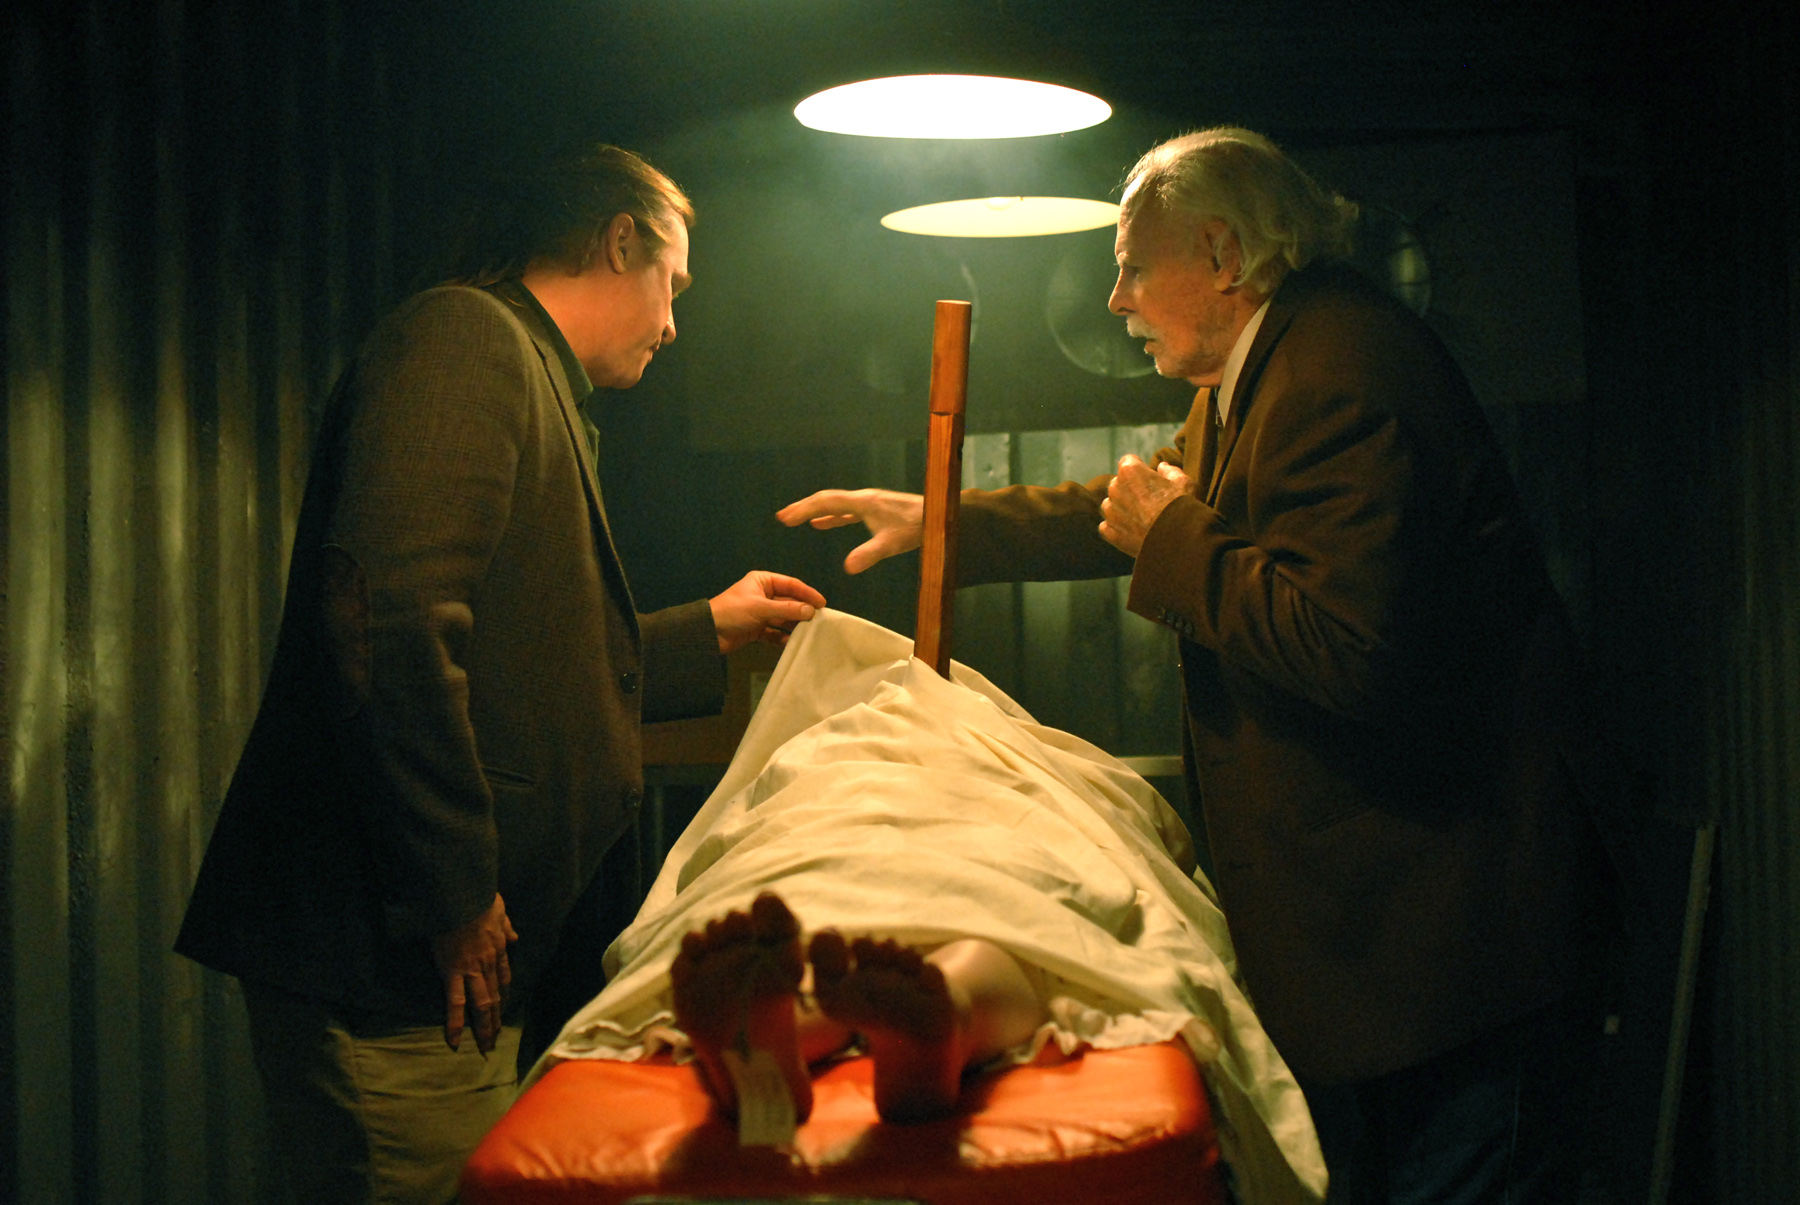 A scene from Francis Ford Coppola's TWIXT, playing at the 55th San Francisco International Film Festival, April 19 - May 3, 2012.